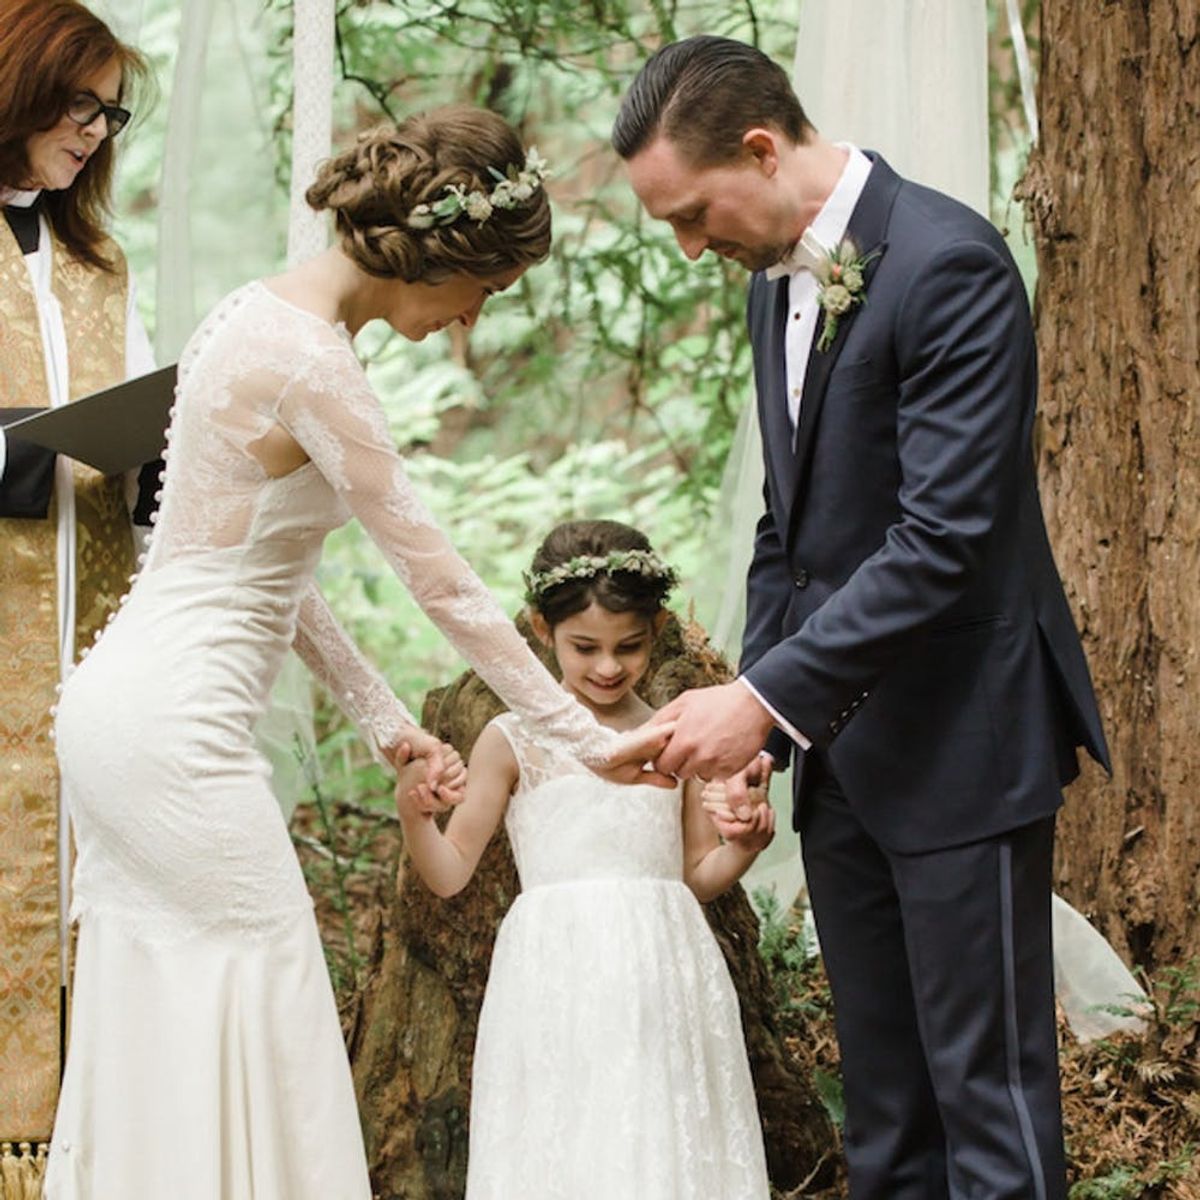 13 Ways to Include Your Kids in the Wedding